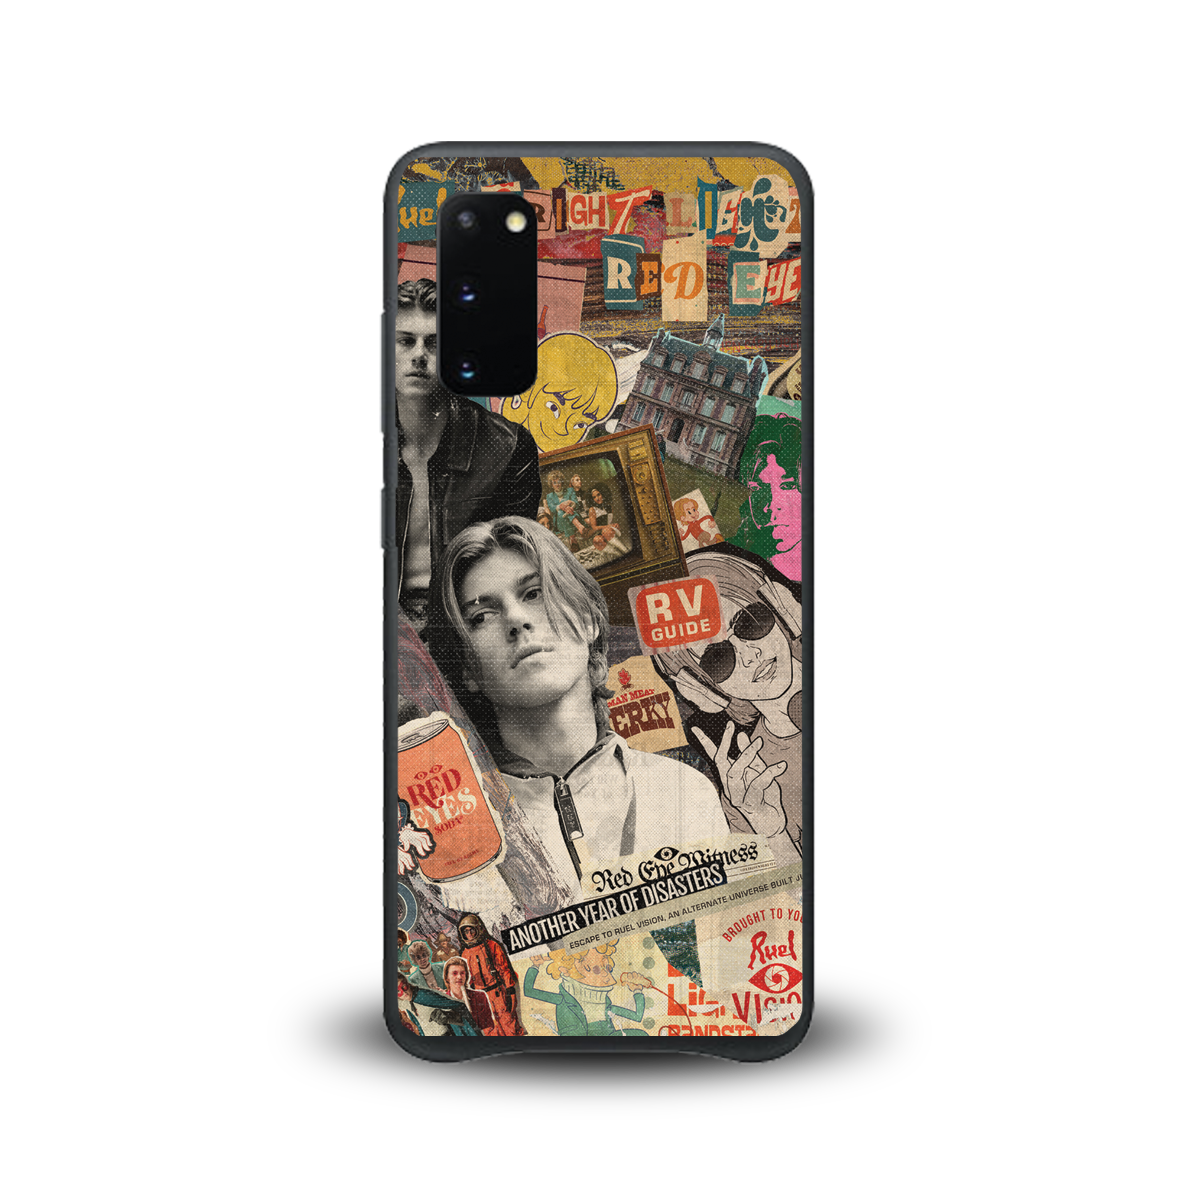 Samsung Galaxy phone case with collage of Ruel photos and graphics